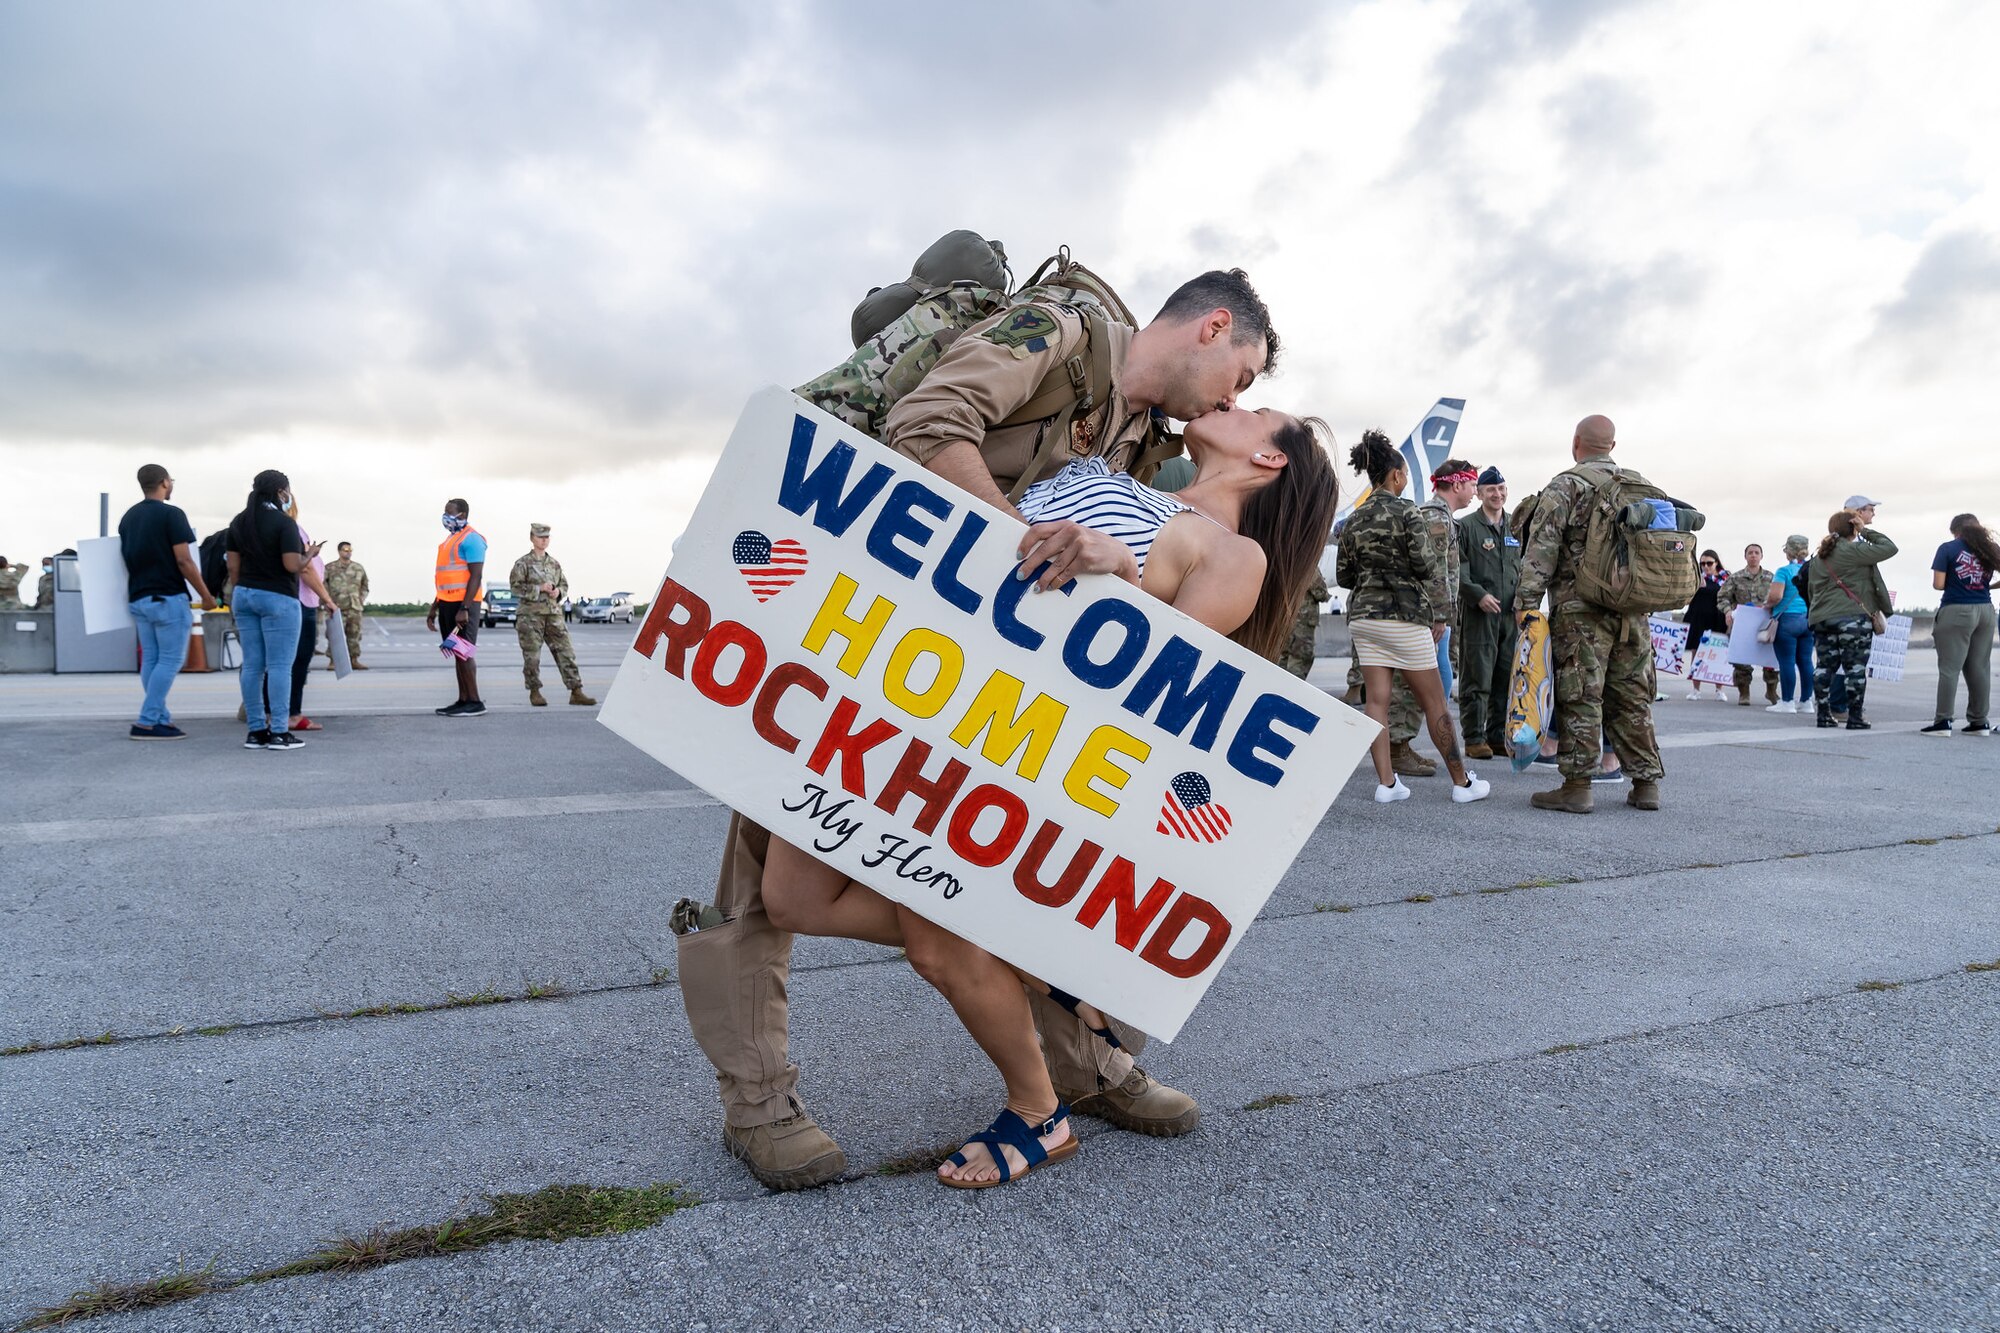 Base personnel, family, and friends welcomed back over 300 personnel from the 482nd Fighter Wing after completing a six month deployment to the Middle East June 1, 2021. The deployed personnel will now enjoyed some much needed time off with their families. (U.S. Air Force photo by Tech Sgt. Lionel Castellano)